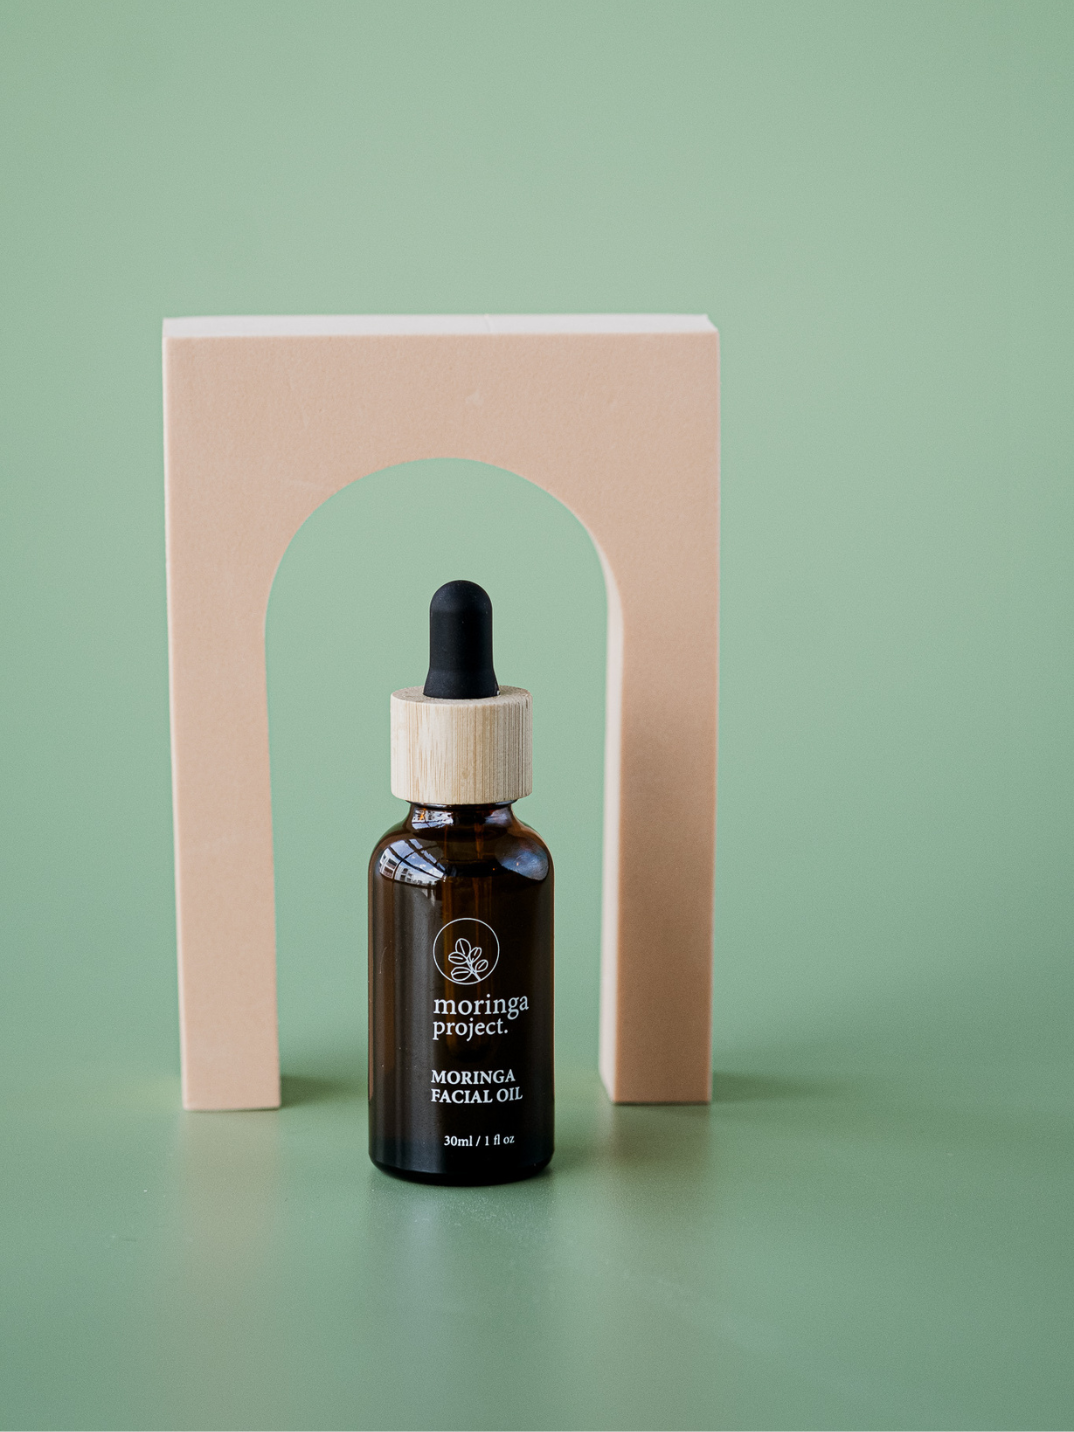 moringa seed oil is an excellent source of nutrients and vitamins to nourish, protect and replenish your skin and hair. Antioxidants help to fight free radical damage that causes wrinkle, effectively reducing visible signs of ageing.  facial oil easily absorbed and lightweight shop now